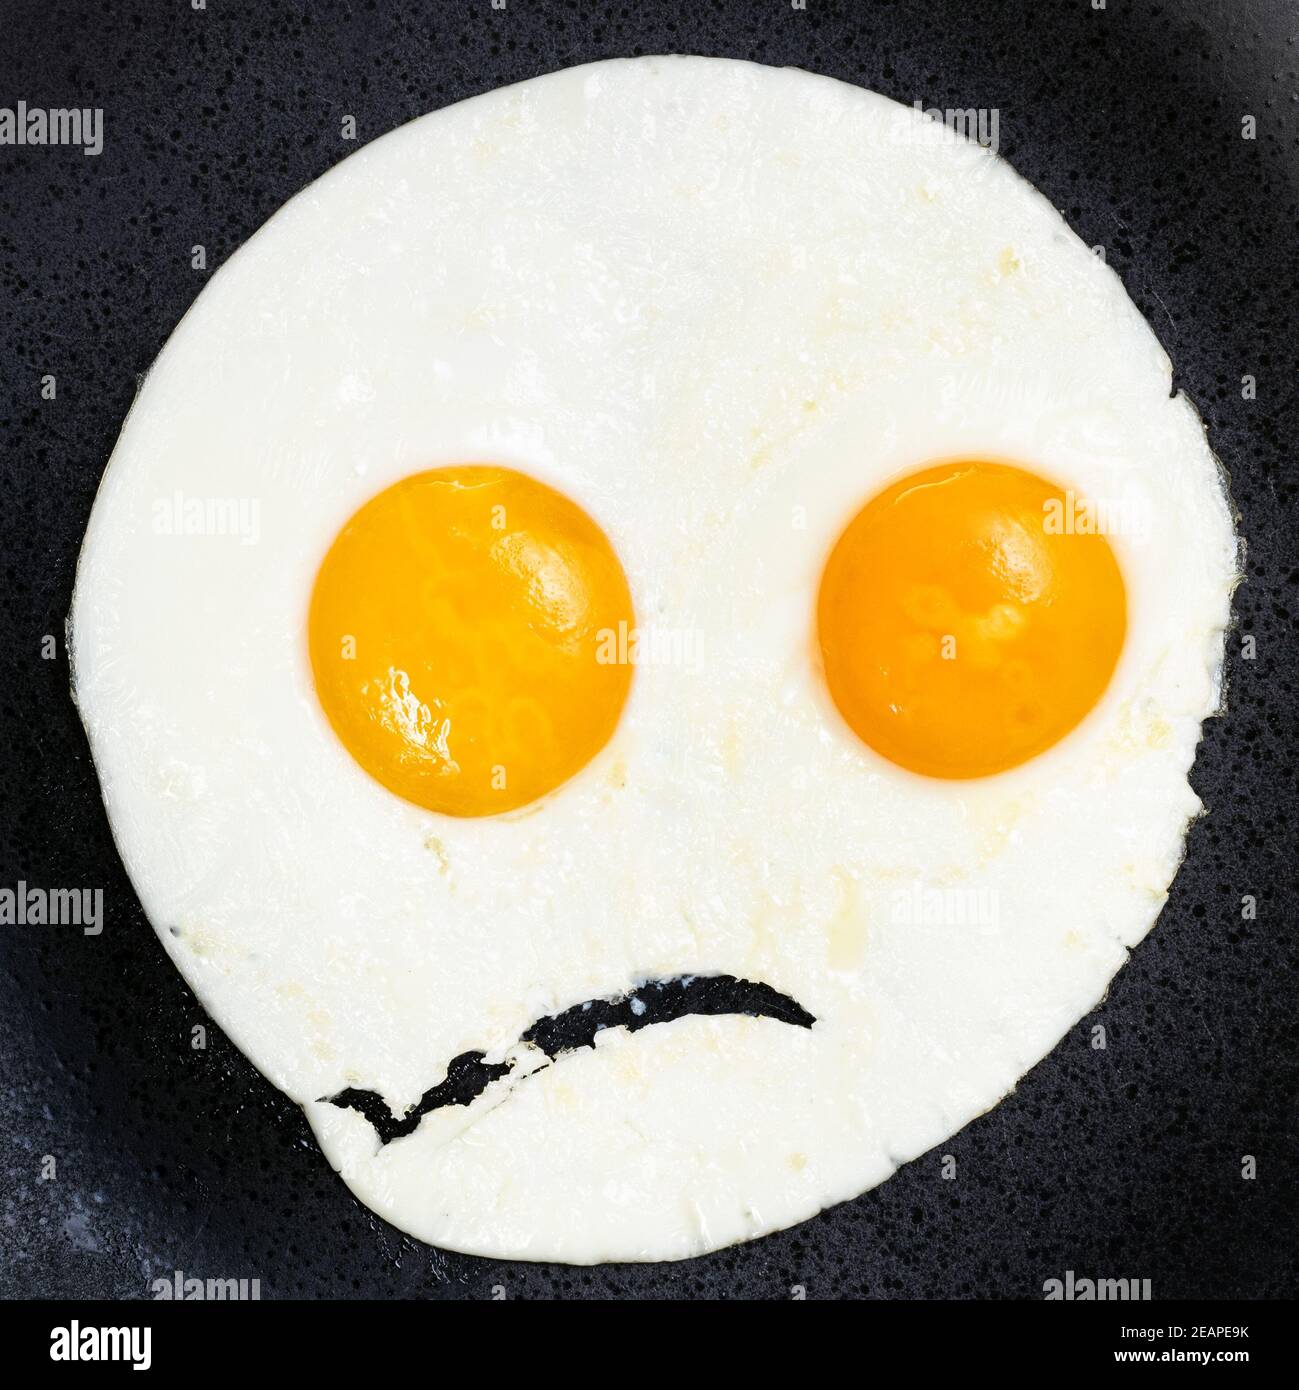 fried eggs on black plate close up Stock Photo